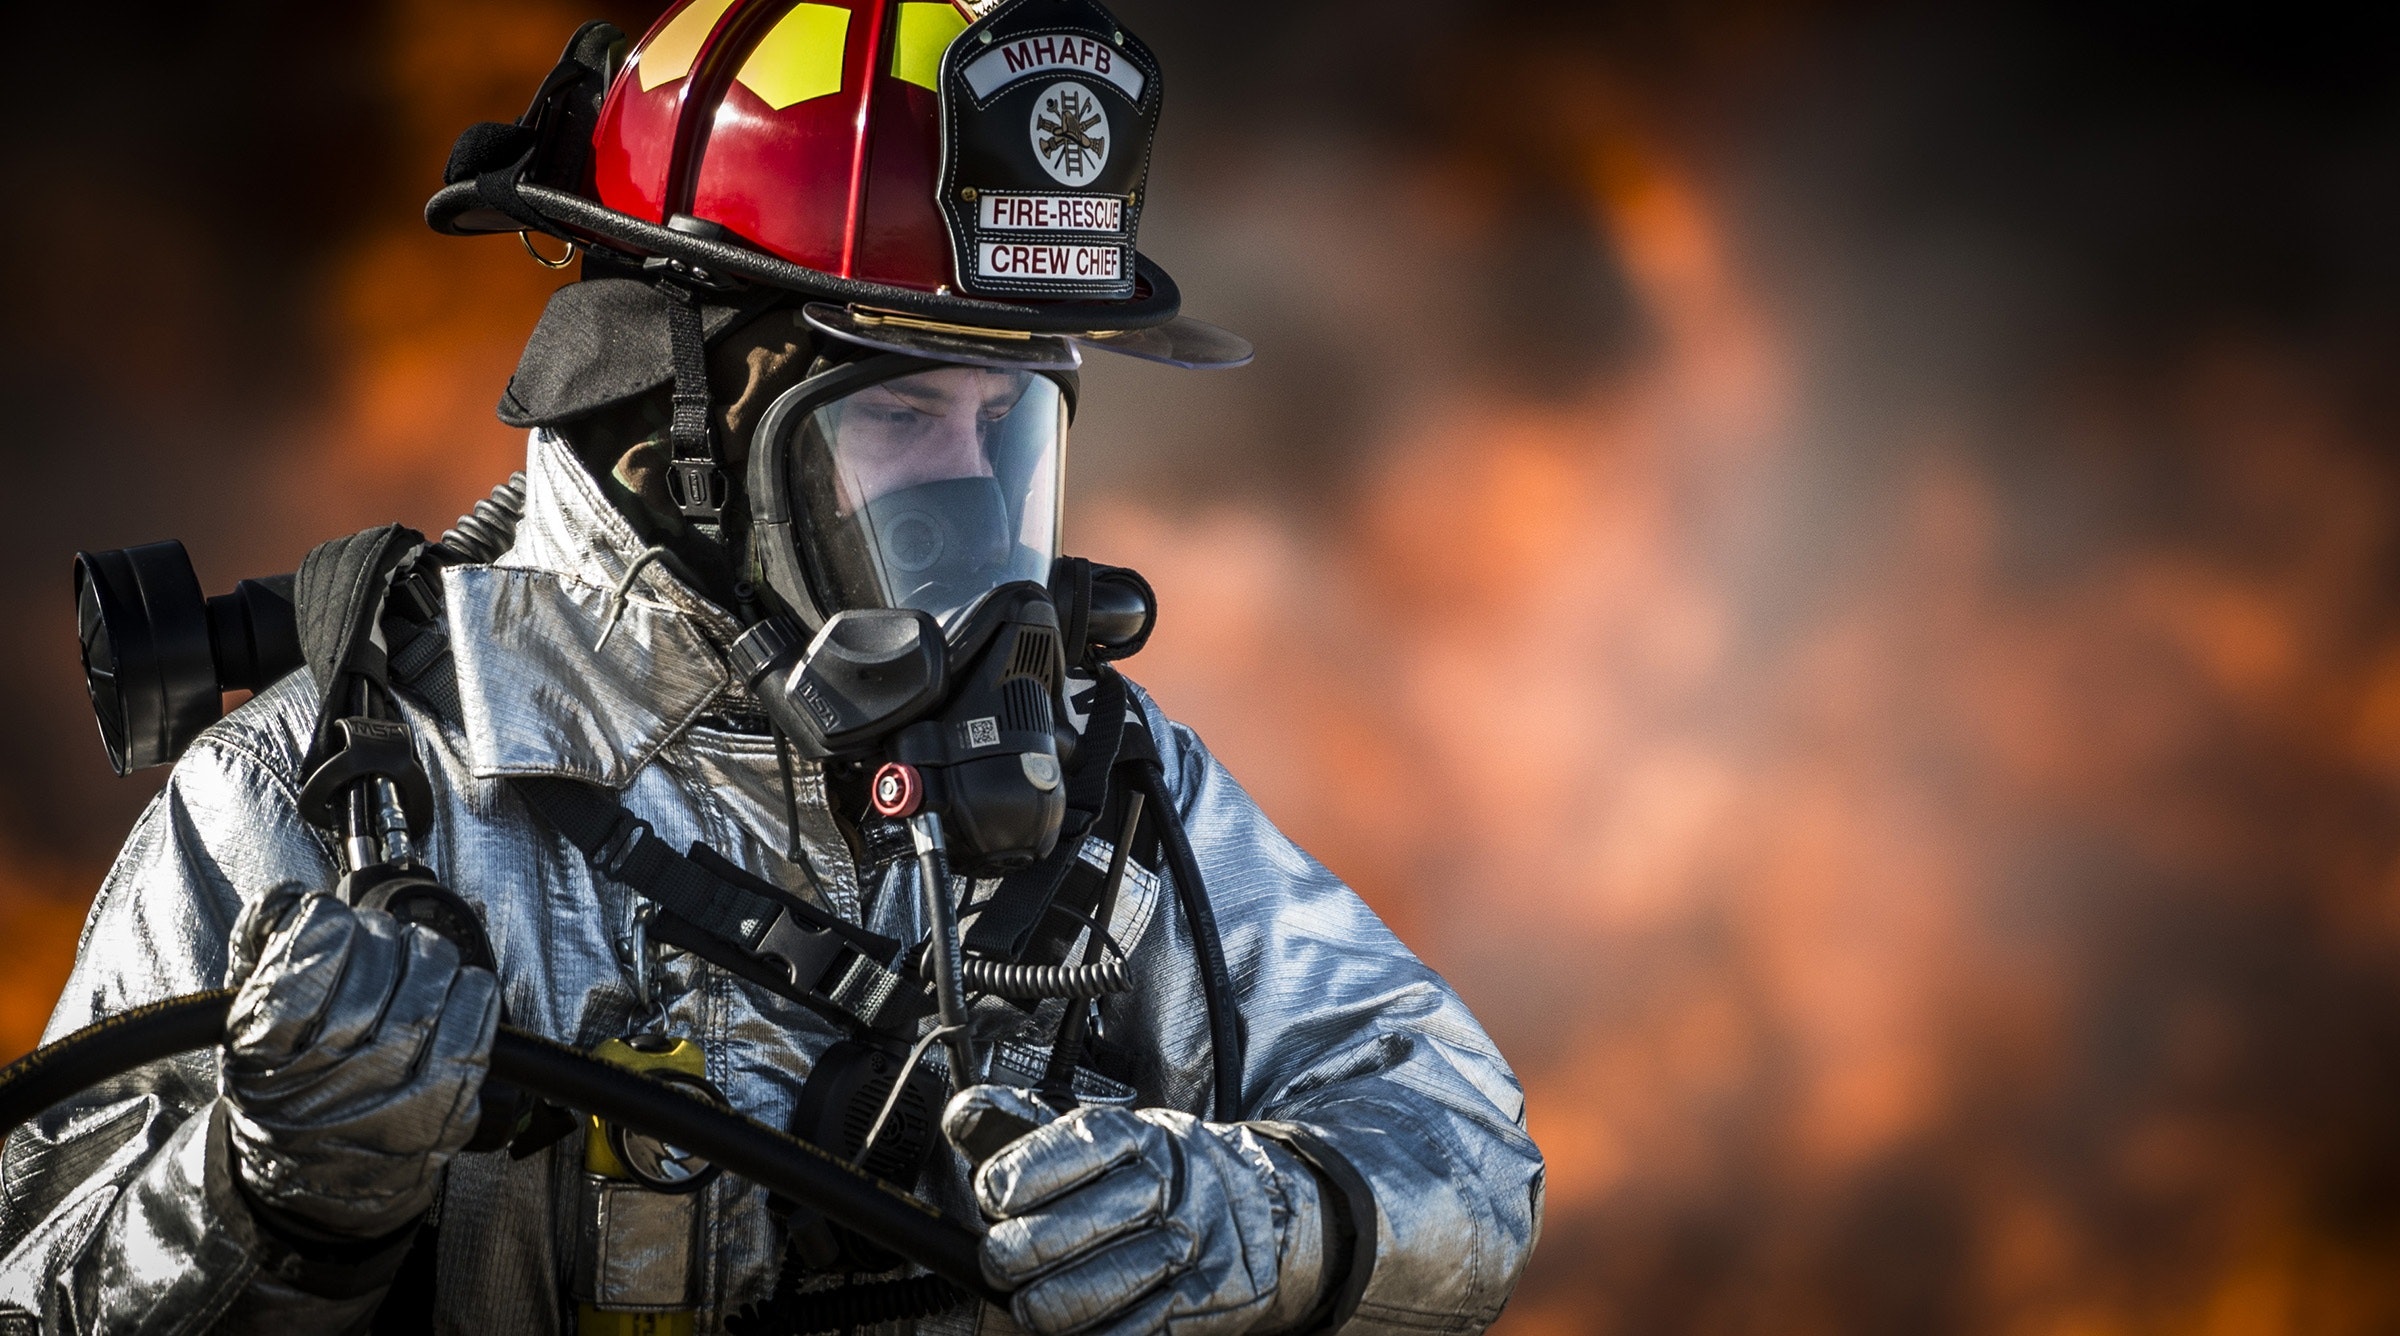 Firefighters photos download the best free firefighters stock photos hd images